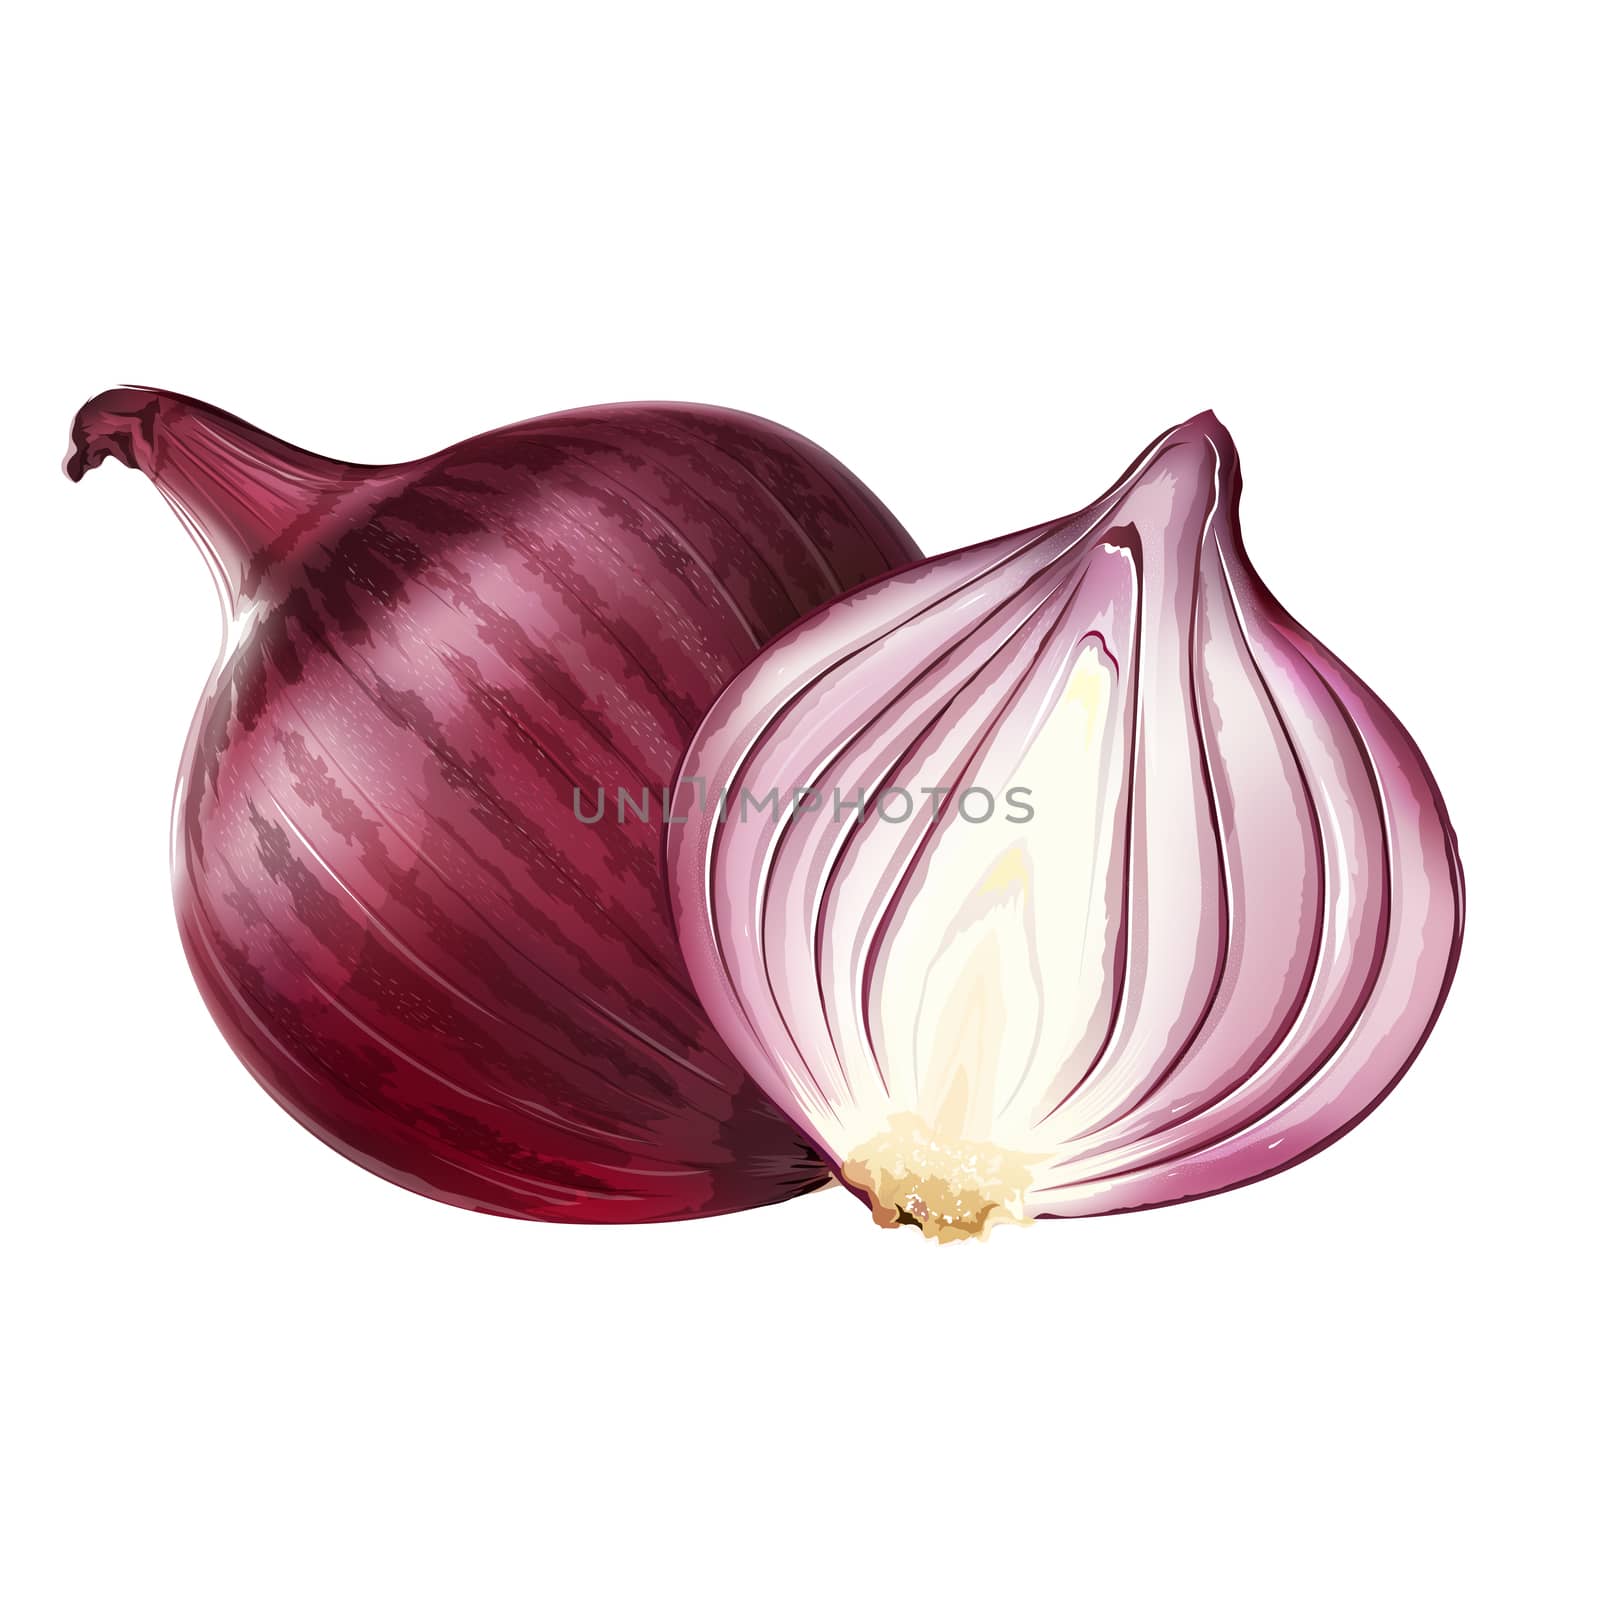 Red onion on white background by ConceptCafe